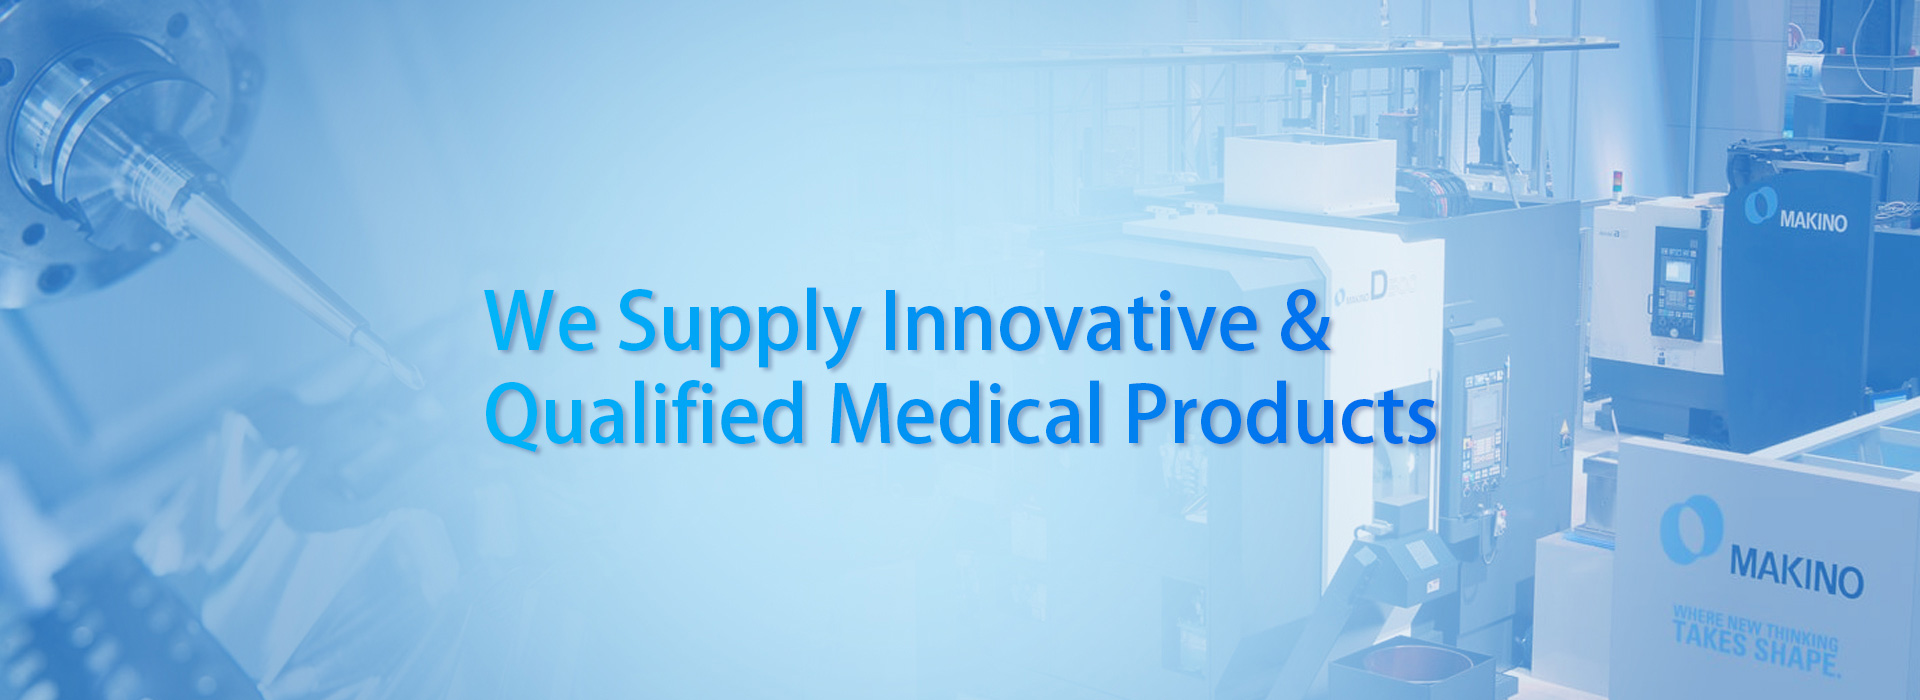 We Supply lnnovative - Qualified Medical Products